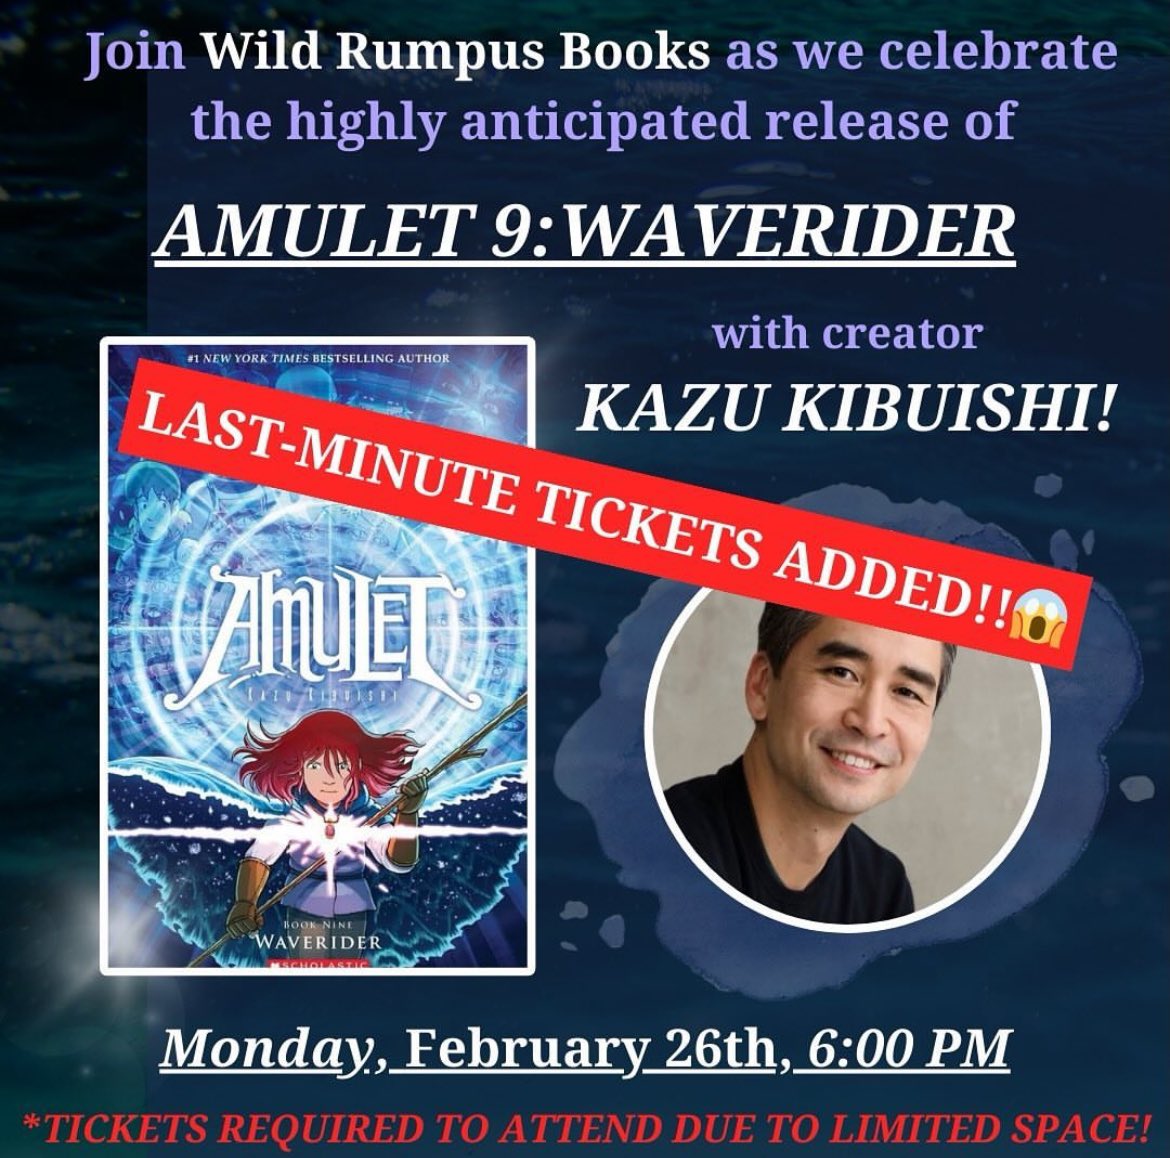 We moved to a larger venue and have released 30 additional tickets to our event with AMULET creator Kazu Kibuishi on Monday, 2/26! Registration is required to attend. Link in bio, when they're gone, they're gone!